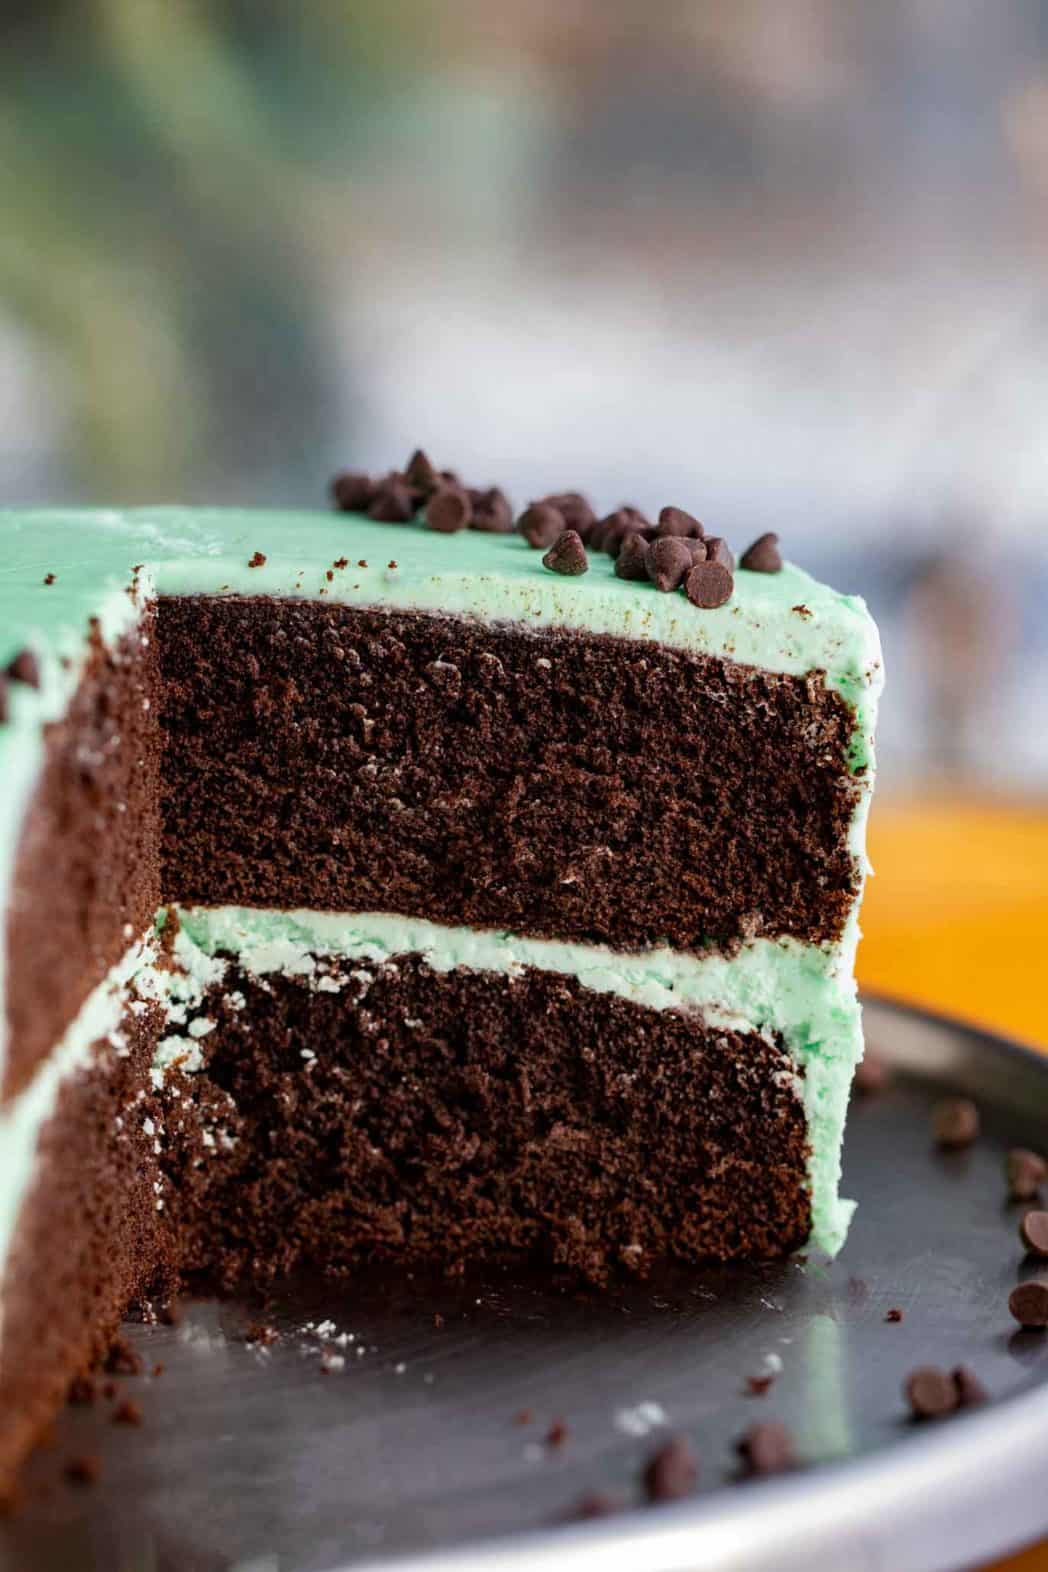 Mint Chocolate Cake cut into with green mint frosting